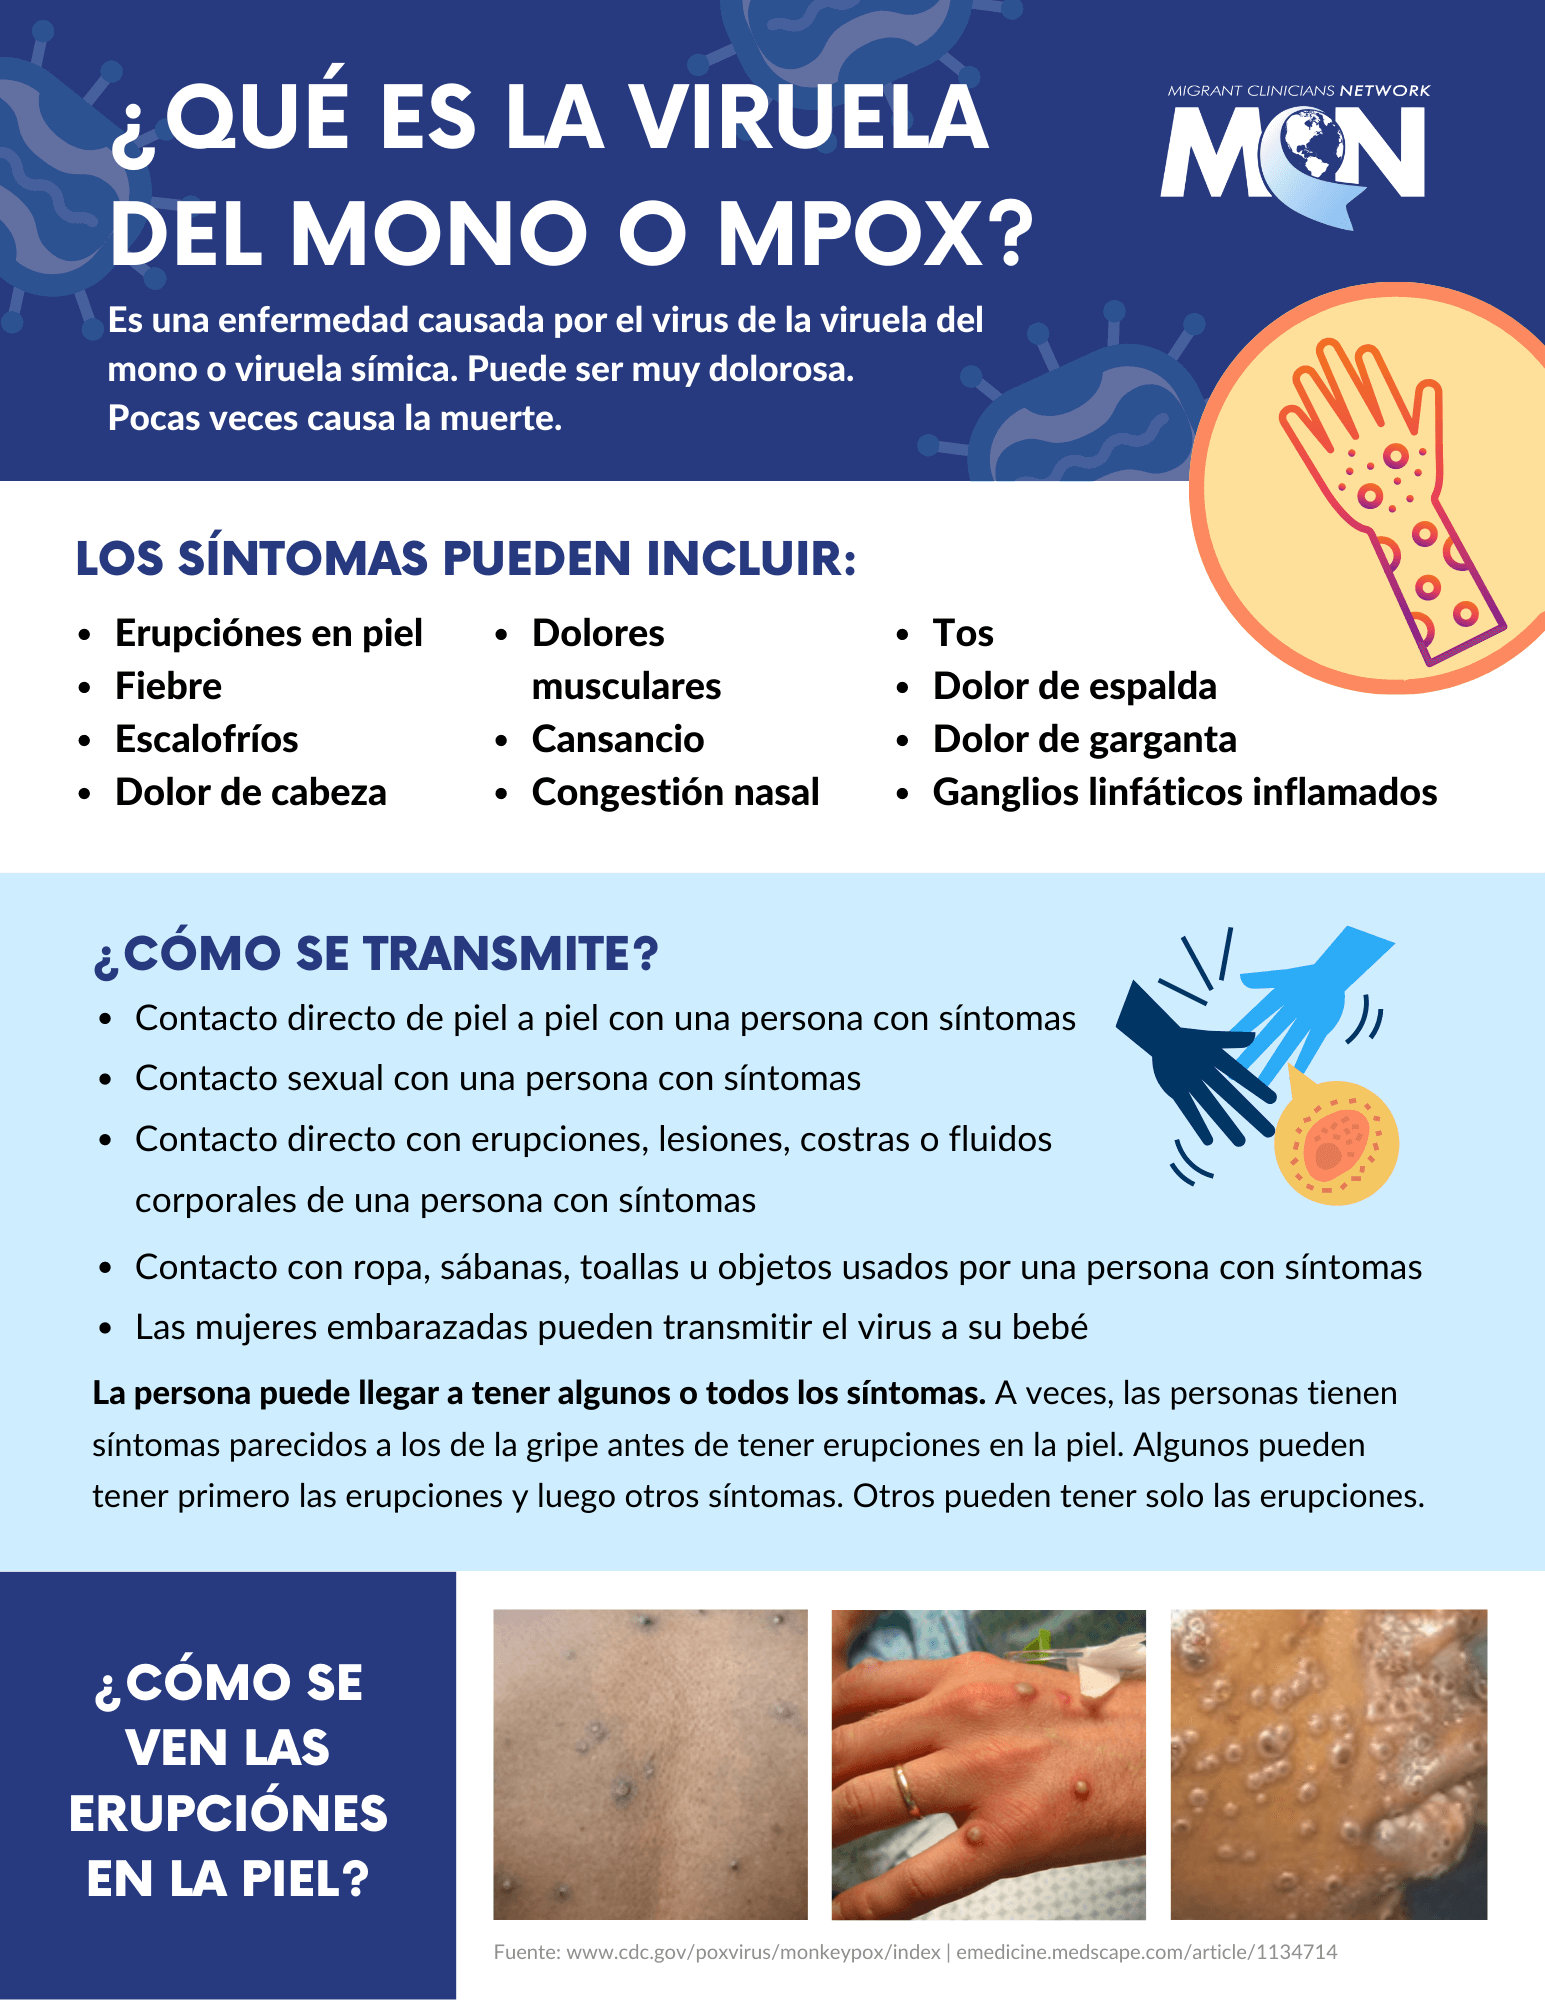 Factsheet with dark blue, light blue, and white background and Migrant Clinicians Network logo at top right corner. Information is divided into four horizontal sections with the following topics: What is monkeypox?; Symptoms; how it spreads; what does monkeypox look like? Photos of monkeypox rash and bumps on back, hand, and face are along the bottom.